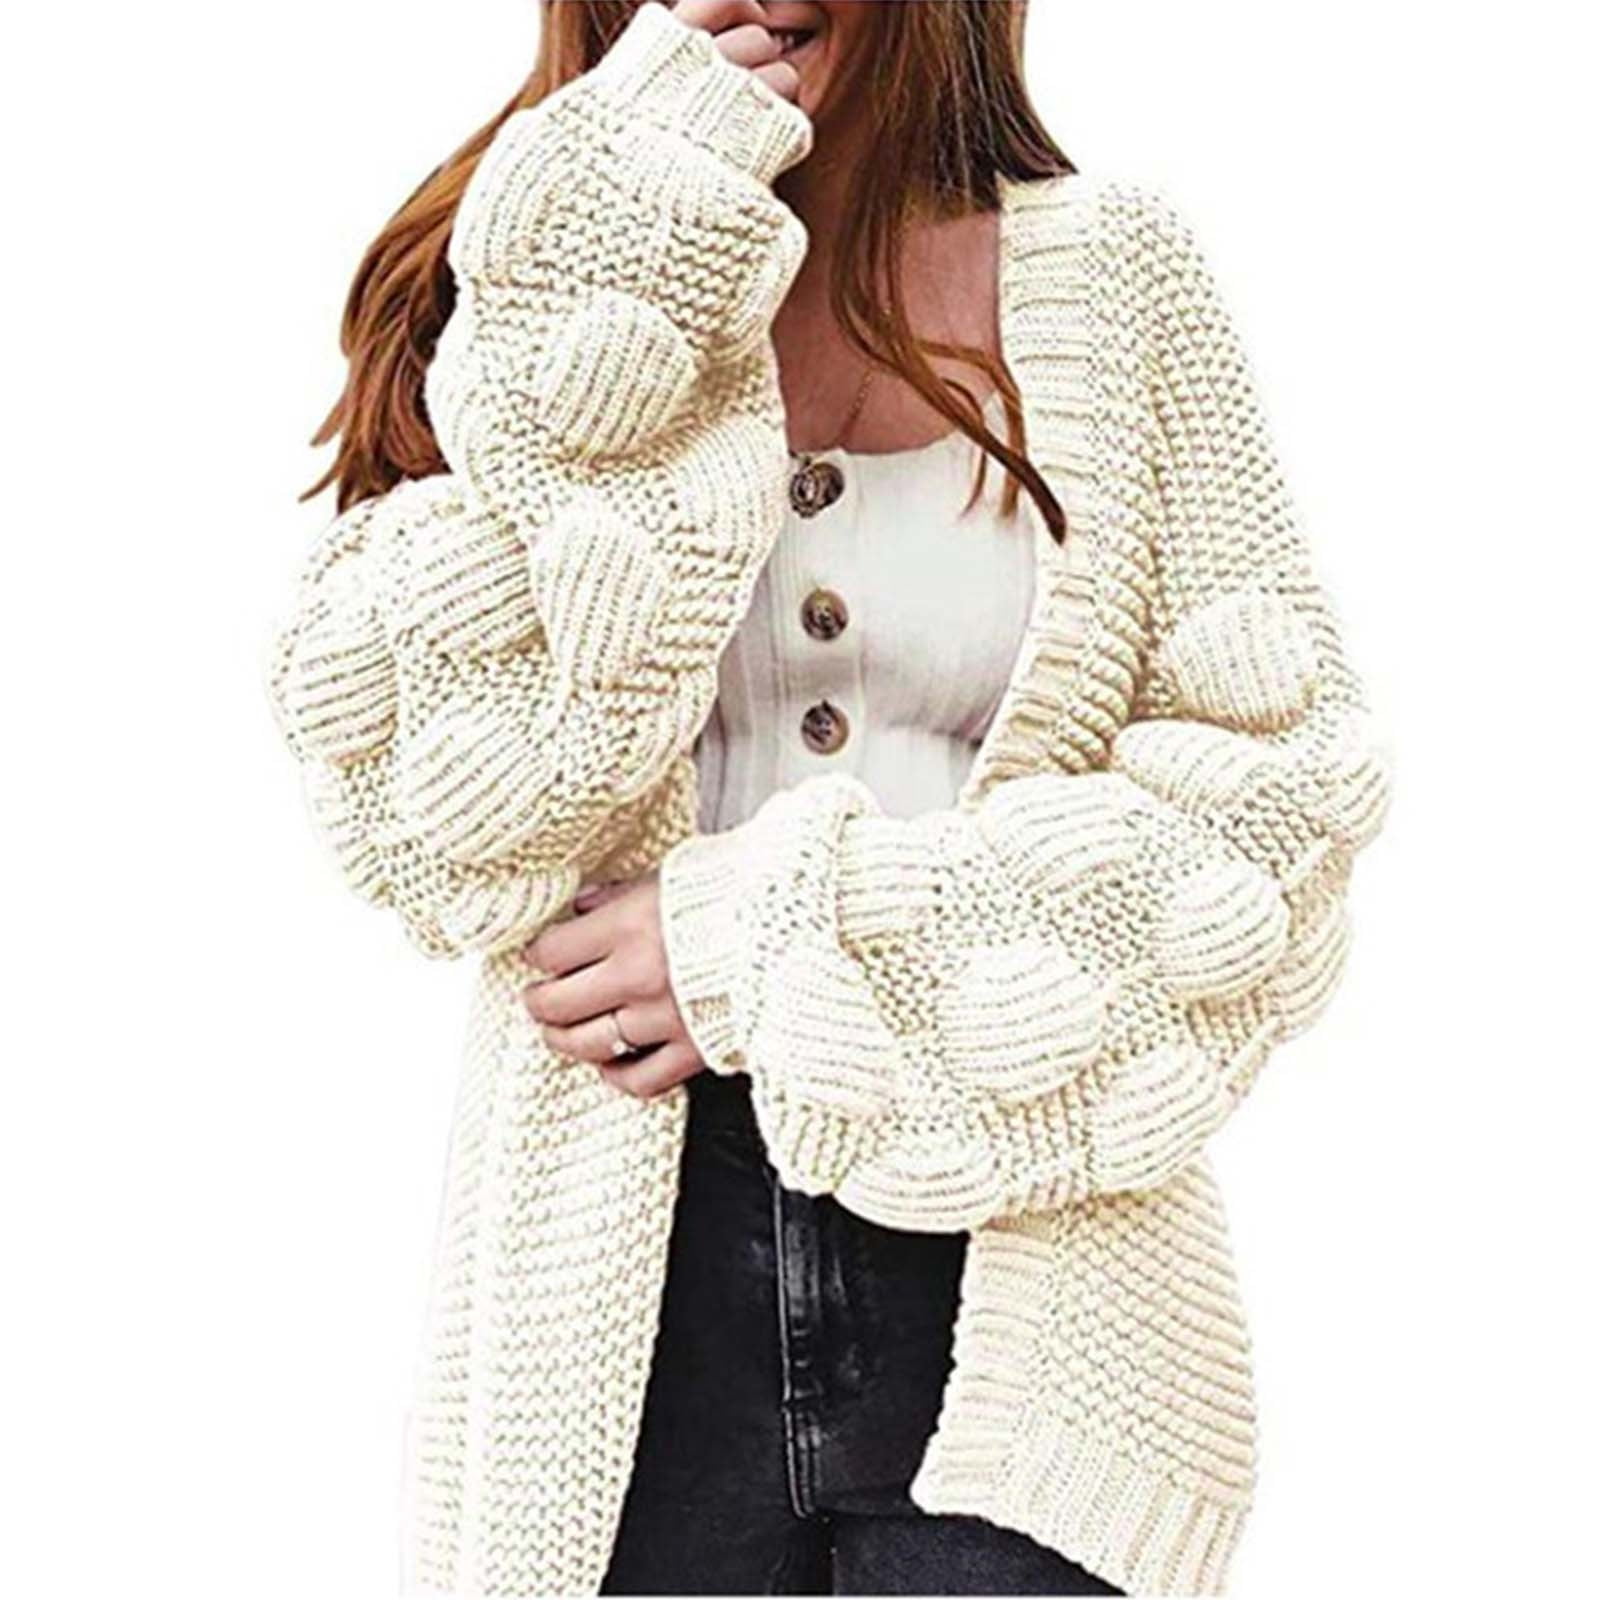 Fiudx Women's Fashion Top Cardigan Solid Color Medium And Long Term Outwear  Long Sleeve Coat Ladies Sweater Plus Size Knit Cardigan Jacket Top White M